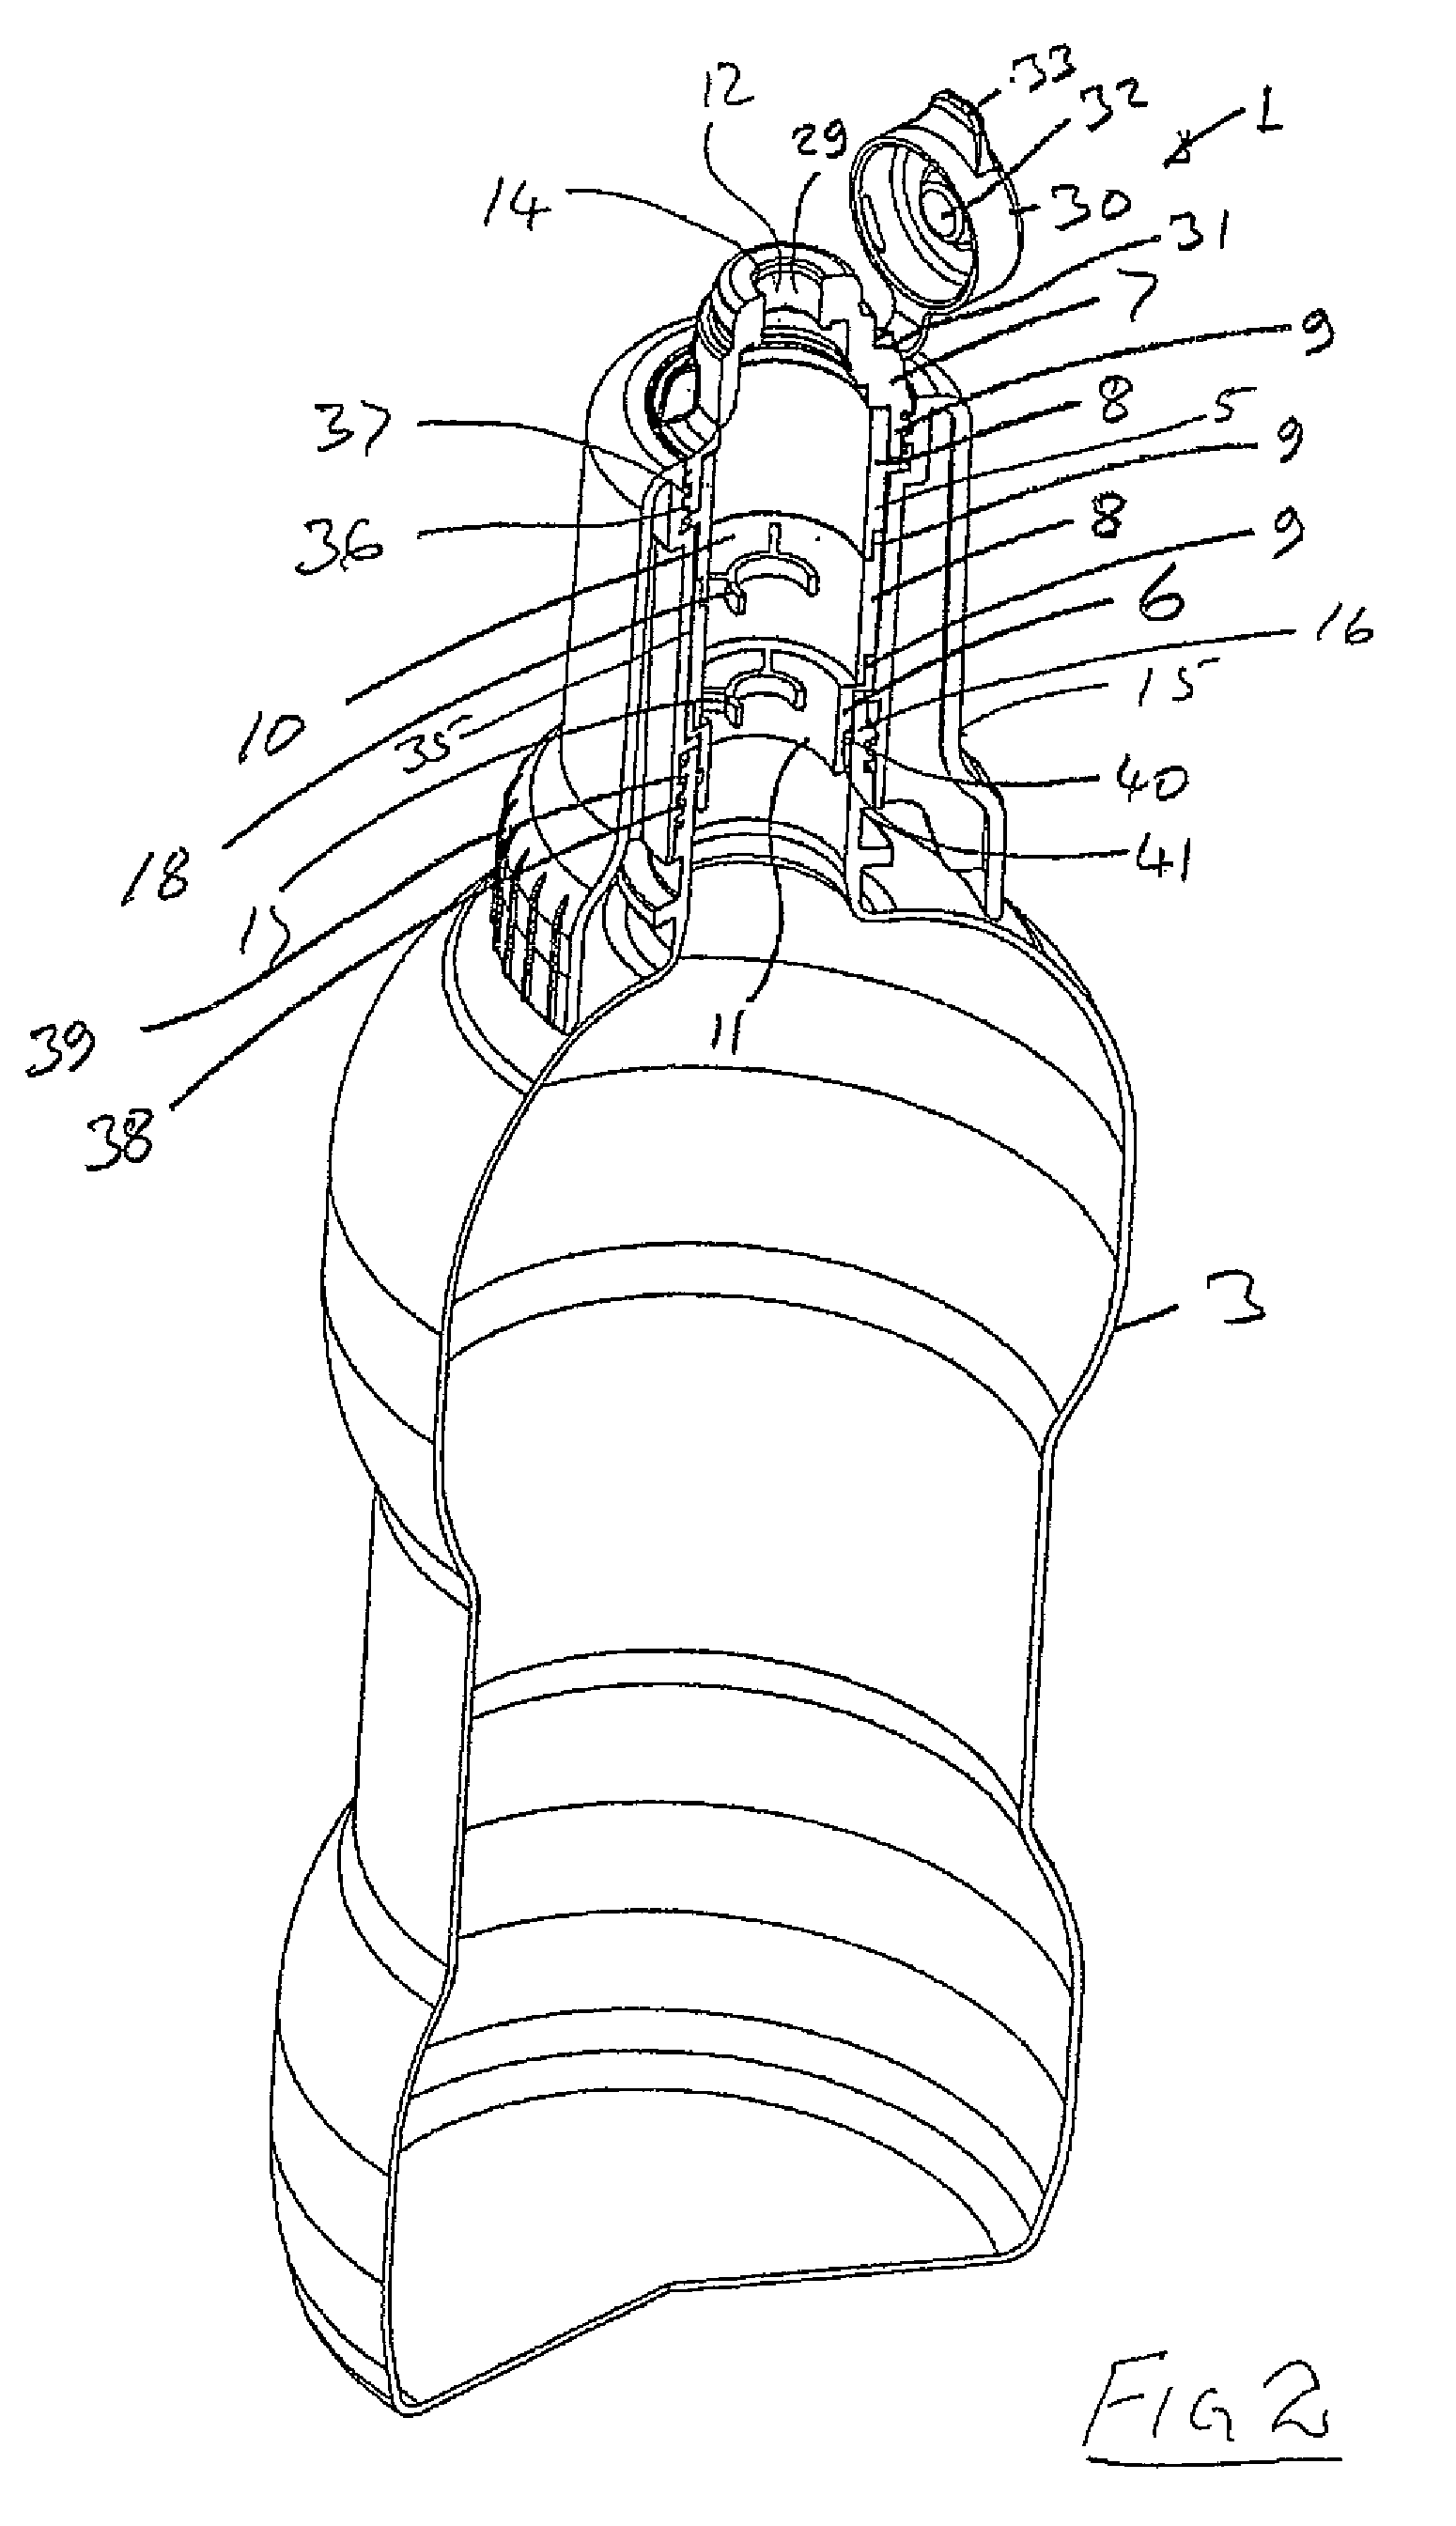 Filter device for filtering liquid from a source